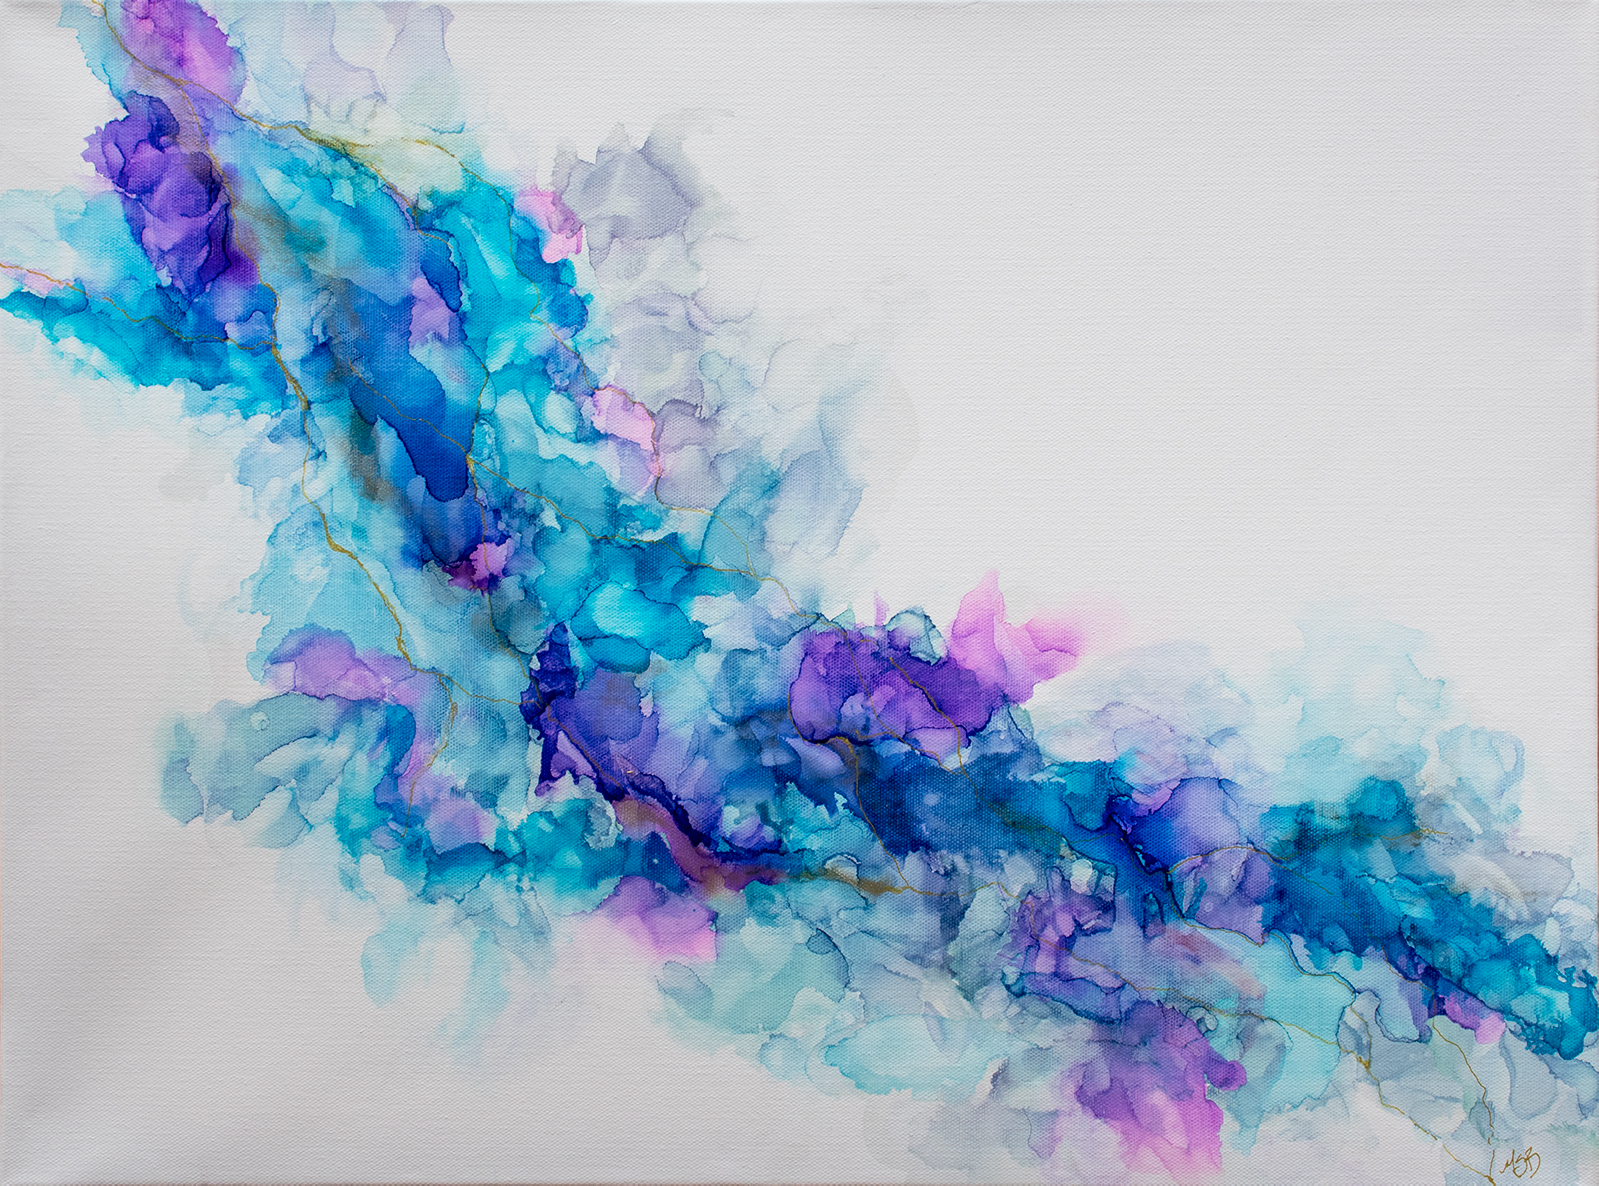 Abstract painting of teal, blue, and purple with gold veins in alcohol ink on canvas by Mary Benke